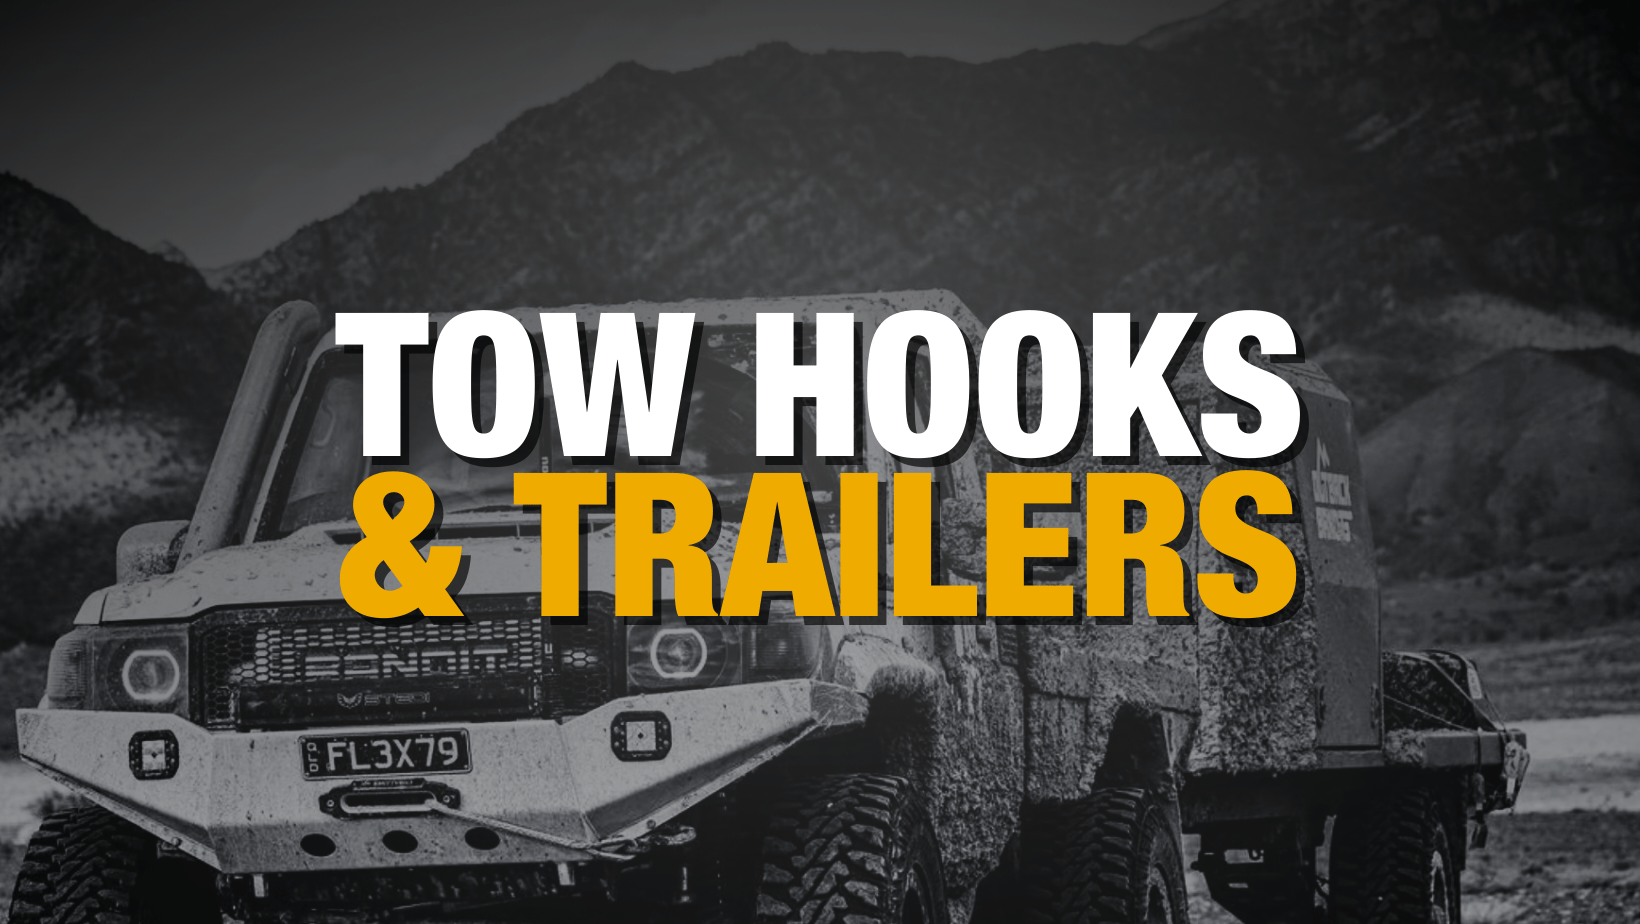 Can hooks be used to connect safety chain on trailers and caravans?